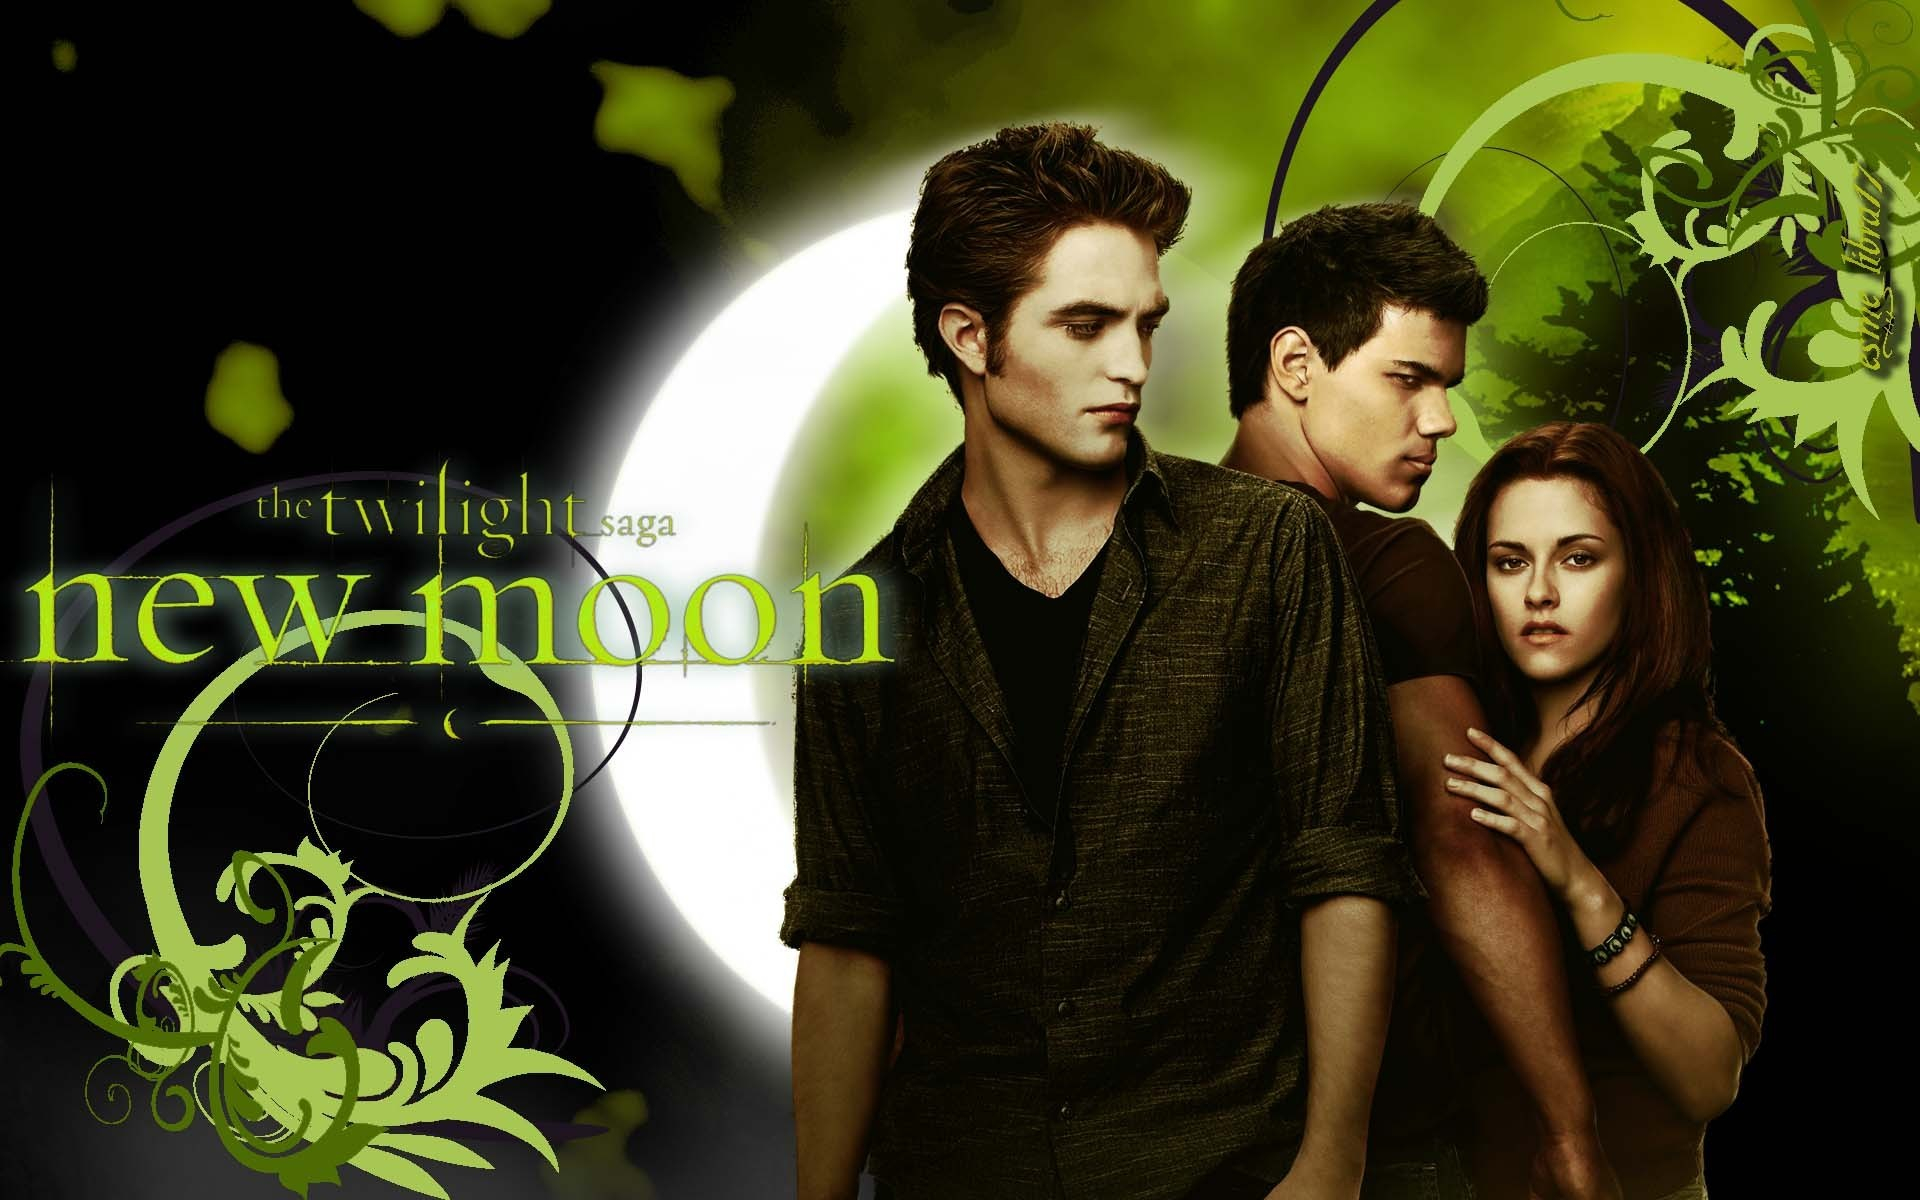 1920x1200 Free download JACOB BELLA AND EDWARD WALLPAPER twilight Crep250sculo [] for your Desktop, Mobile \u0026 Tablet | Explore 78+ Twilight Jacob Wallpaper | Twilight Wallpaper Jacob, Twilight Jacob Wallpaper, Jacob Twilight Wallpaper